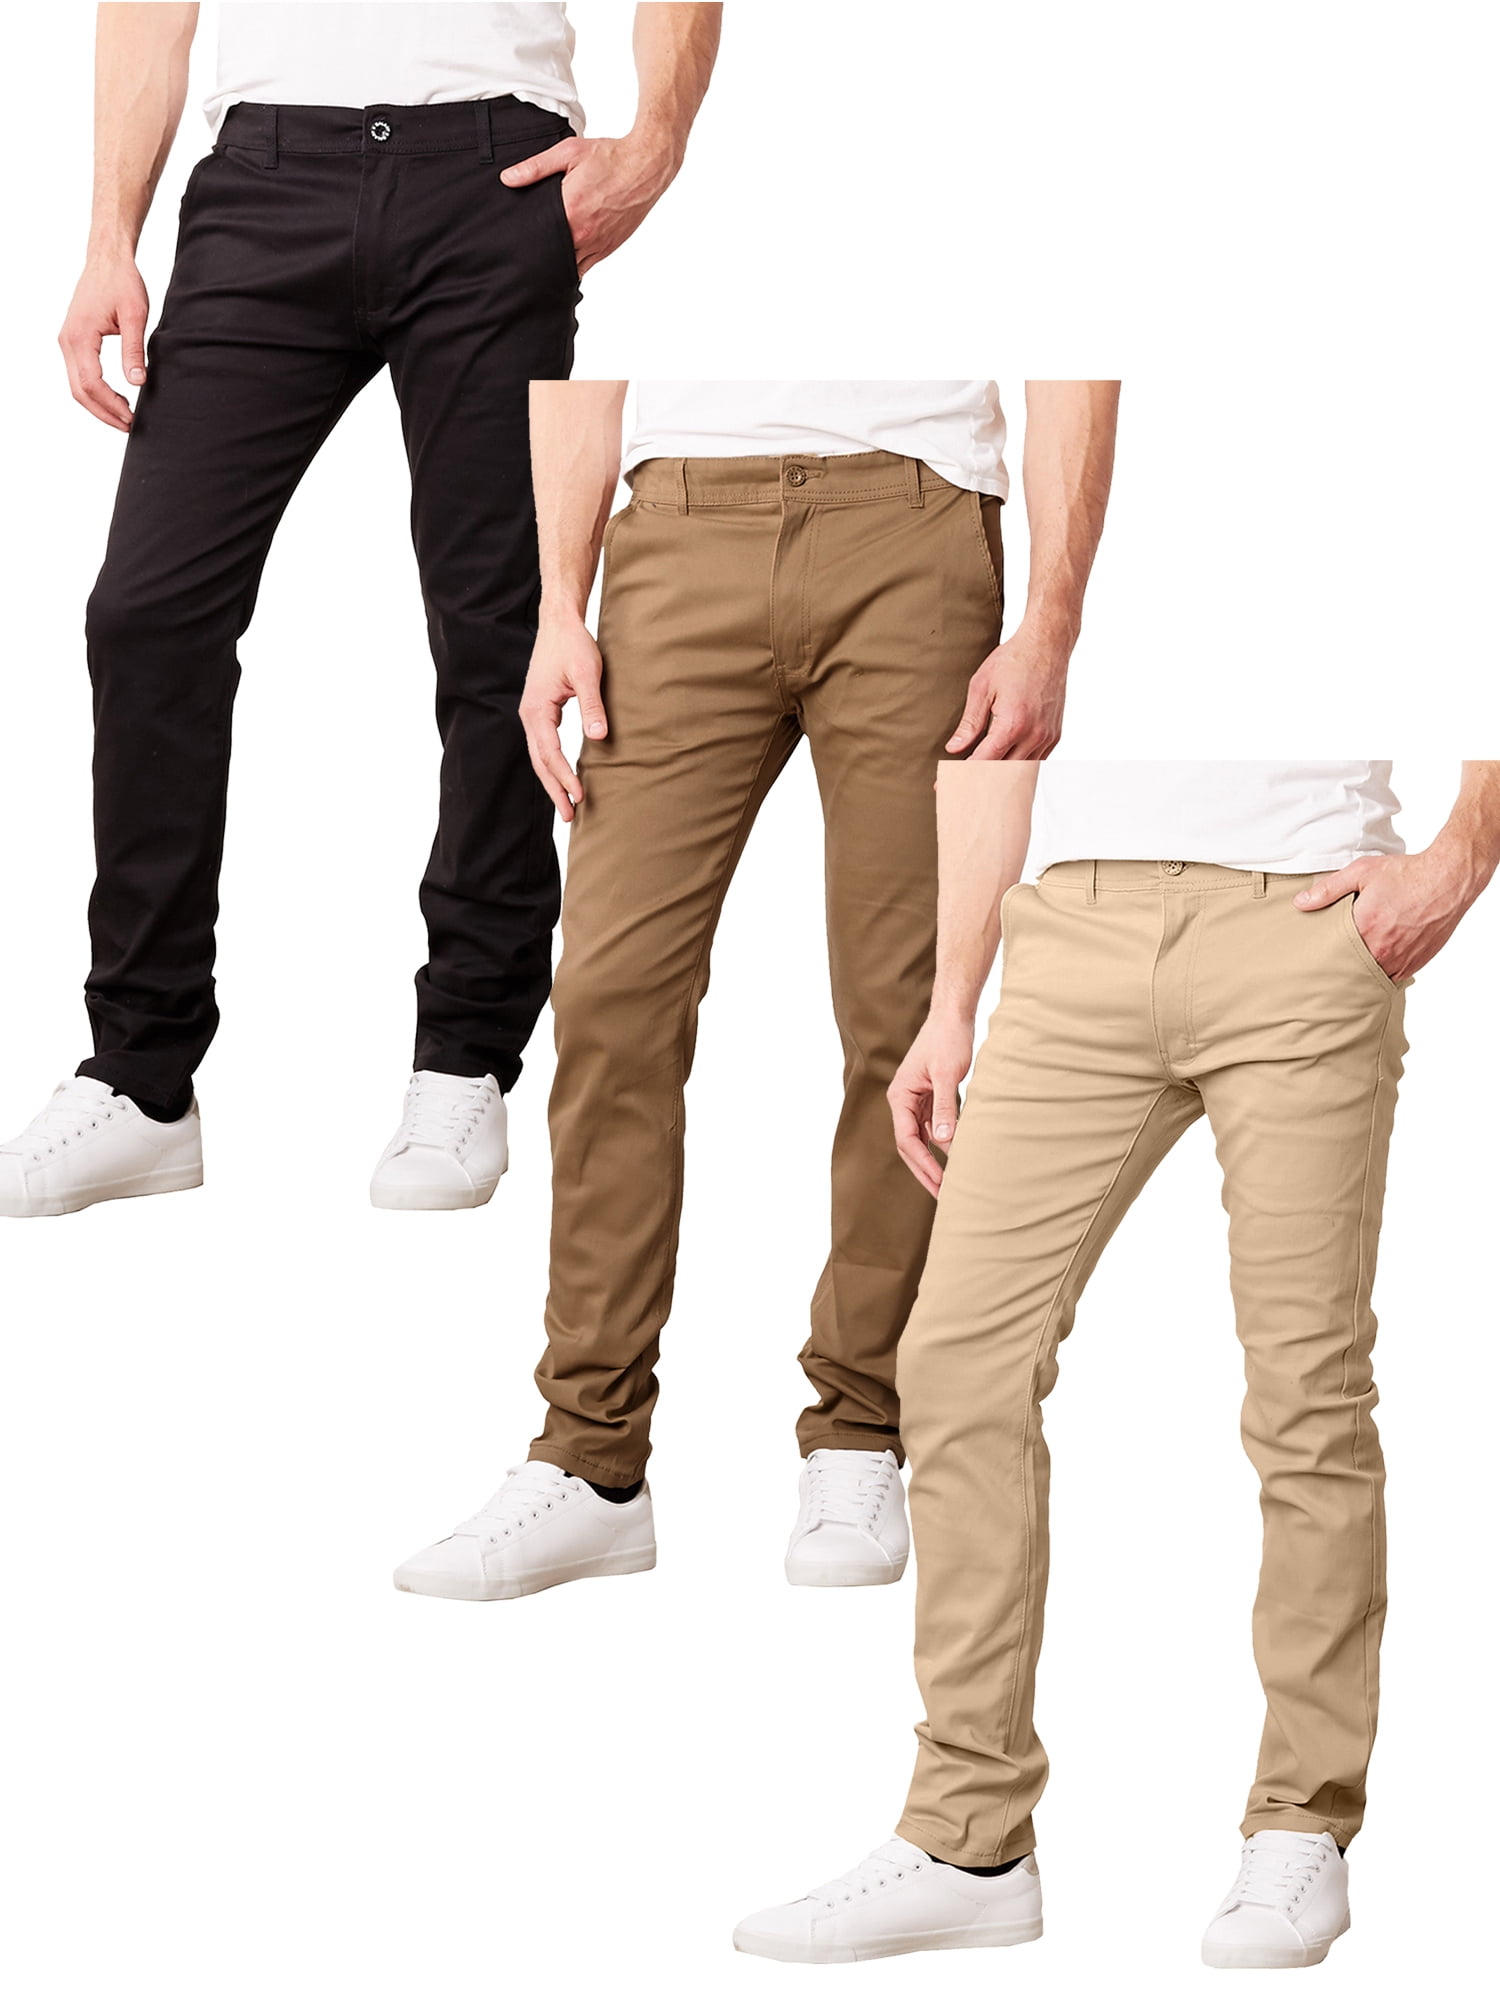 3-Pack Men's Super Stretch Slim Fit Everyday Chino Pants (Sizes